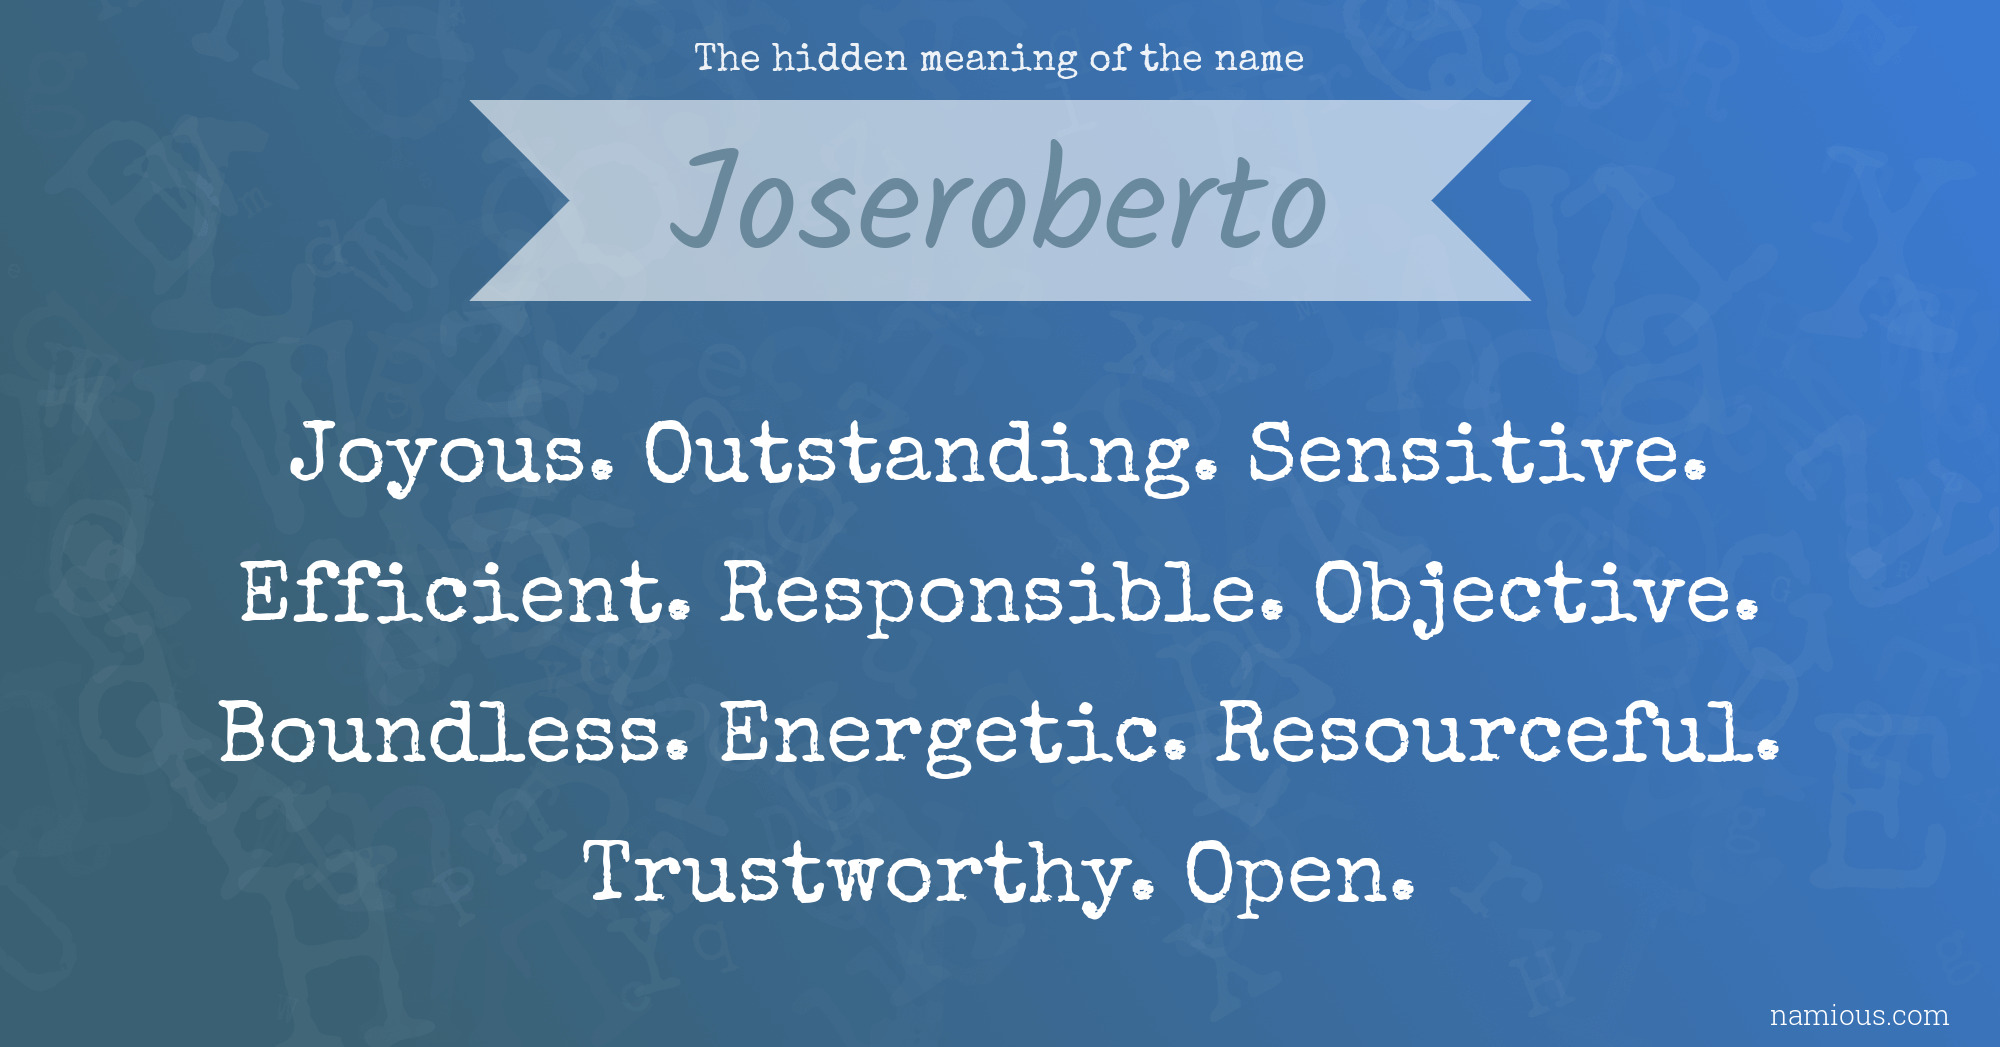 The hidden meaning of the name Joseroberto